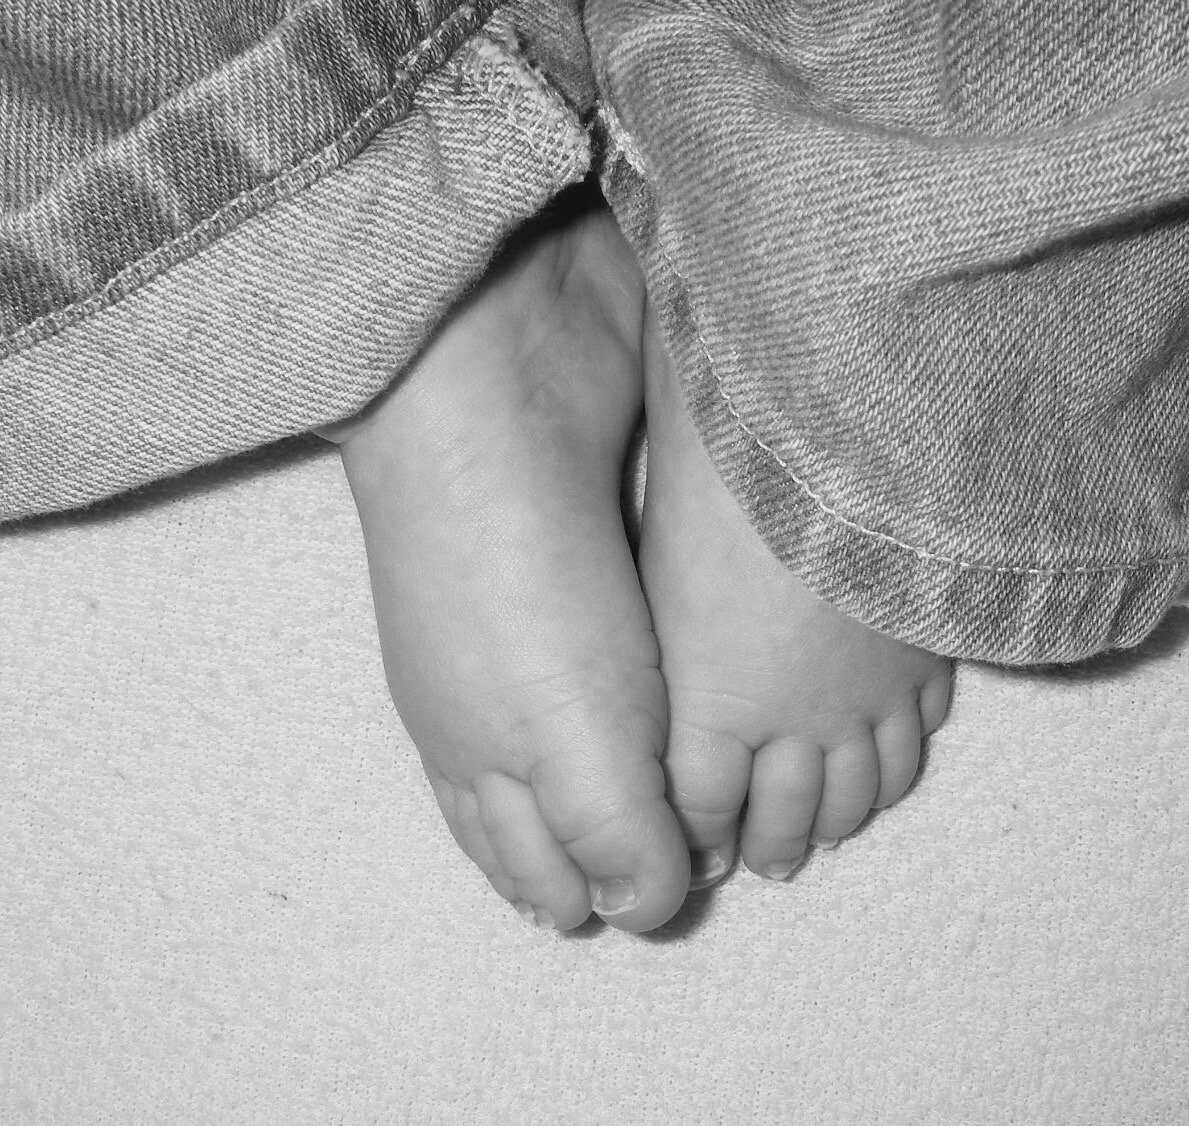 Baby Tilly's feet. Photo: Lorraine Gibson/Lacuna Voices